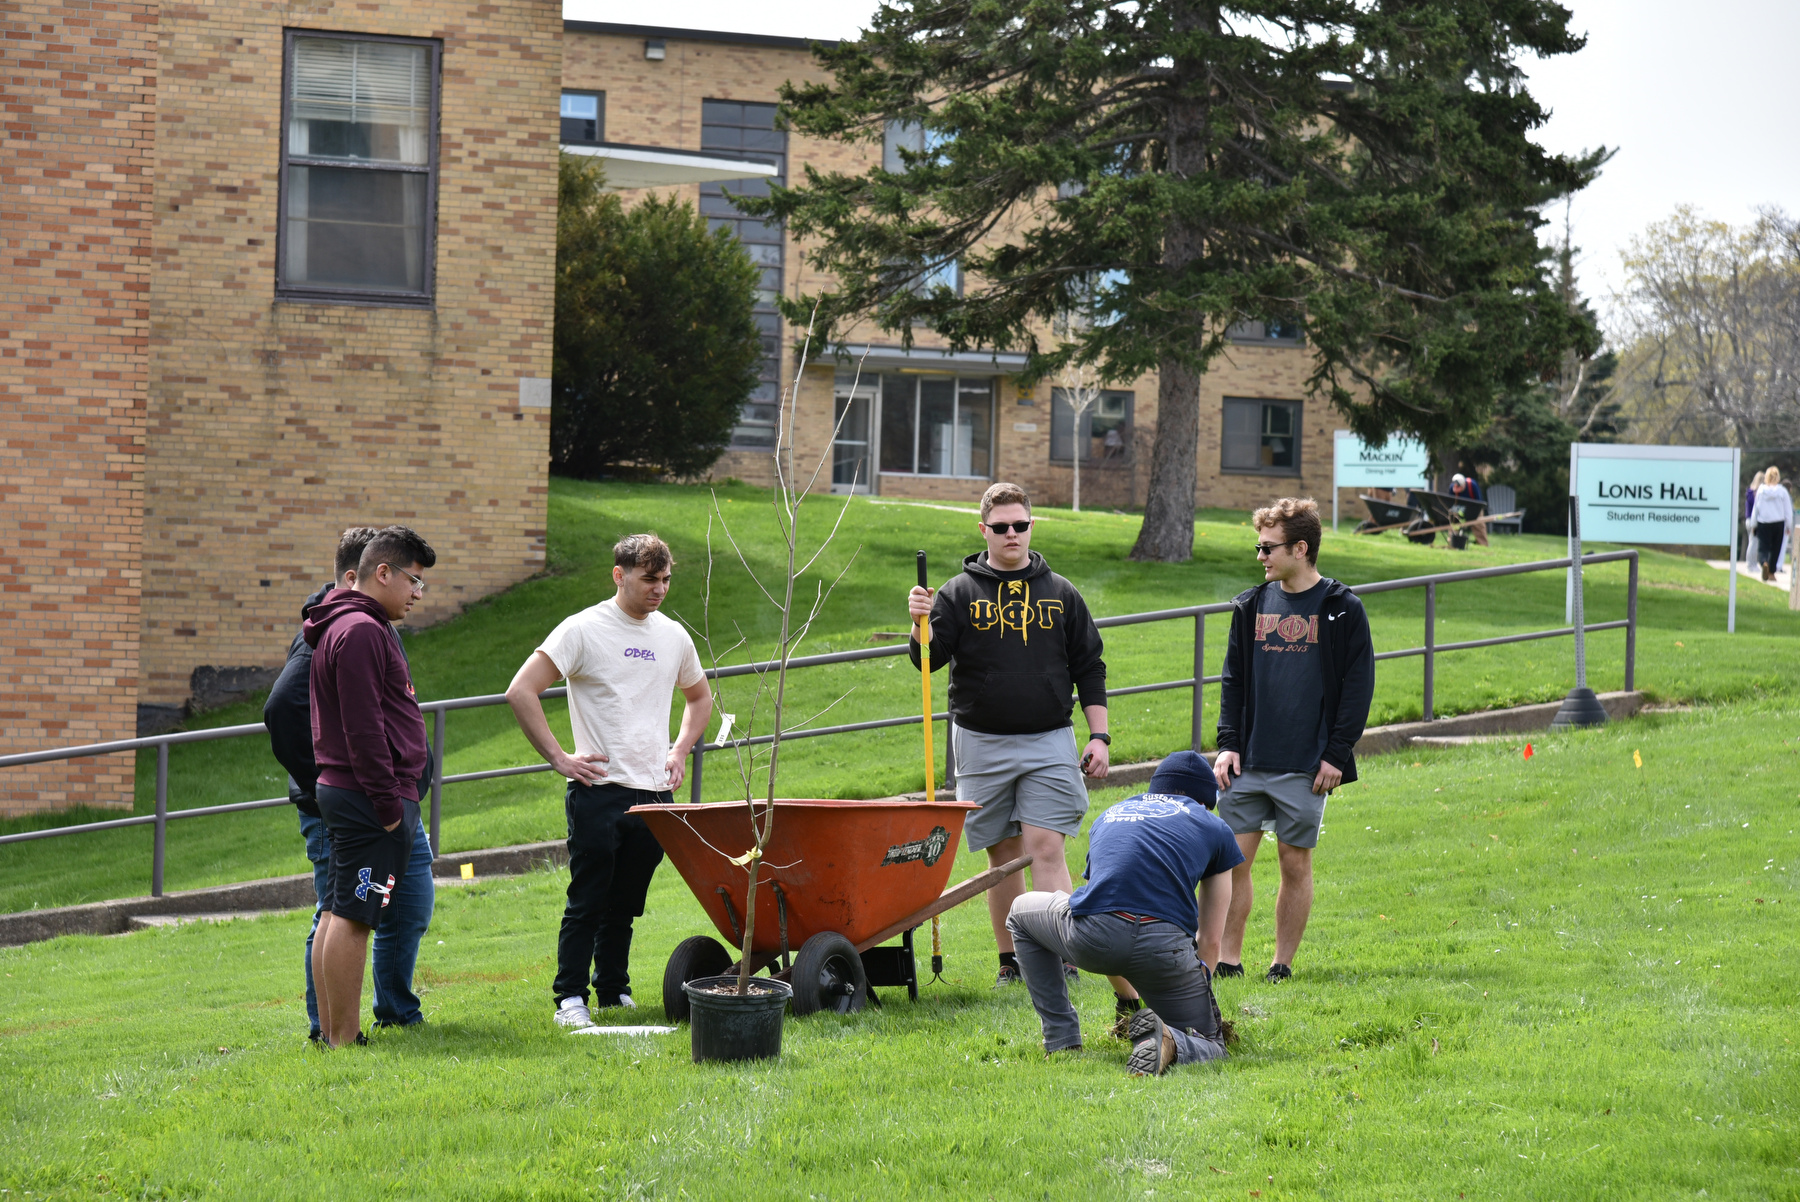 Campus and community members honored Arbor Day on April 28 with some tree plantings on campus and observance readings and speakers at Rice Creek Field Station.